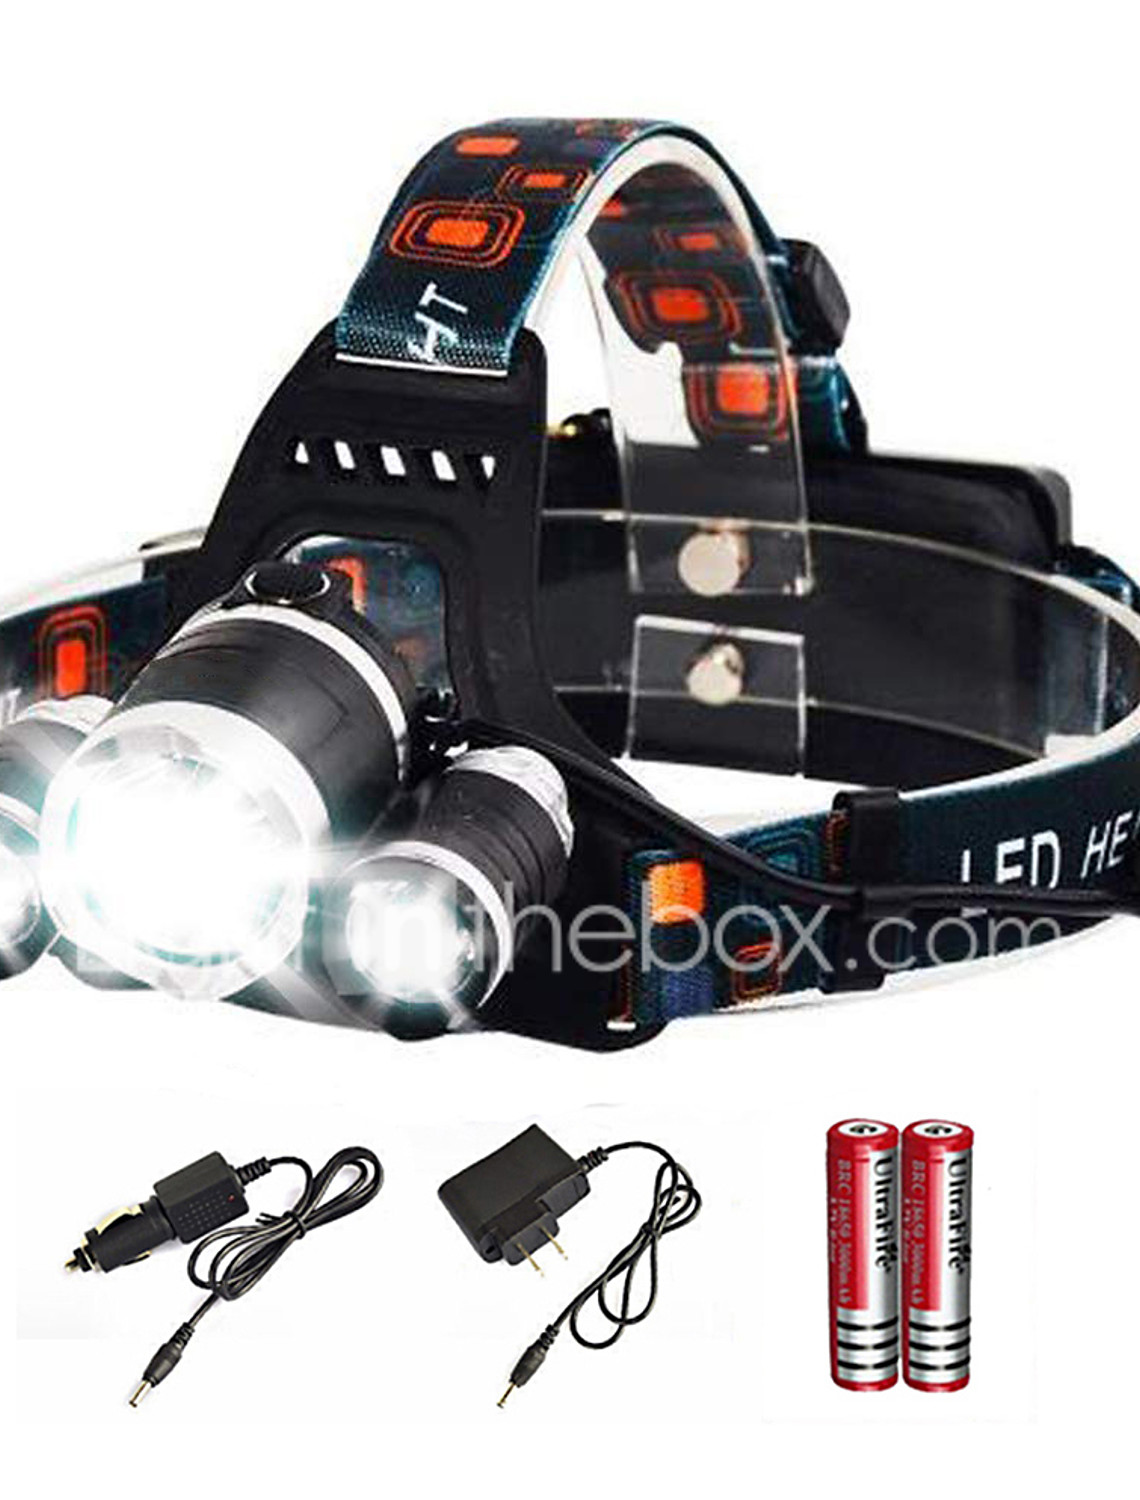 Comfortable Equipment for Running Camping Men Woman Kid Waterproof Super Bright Torch Best Bulb Lamp for Night Walking the Dog Headlamp LED USB Rechargeable White and or Red Light with 5 Modes